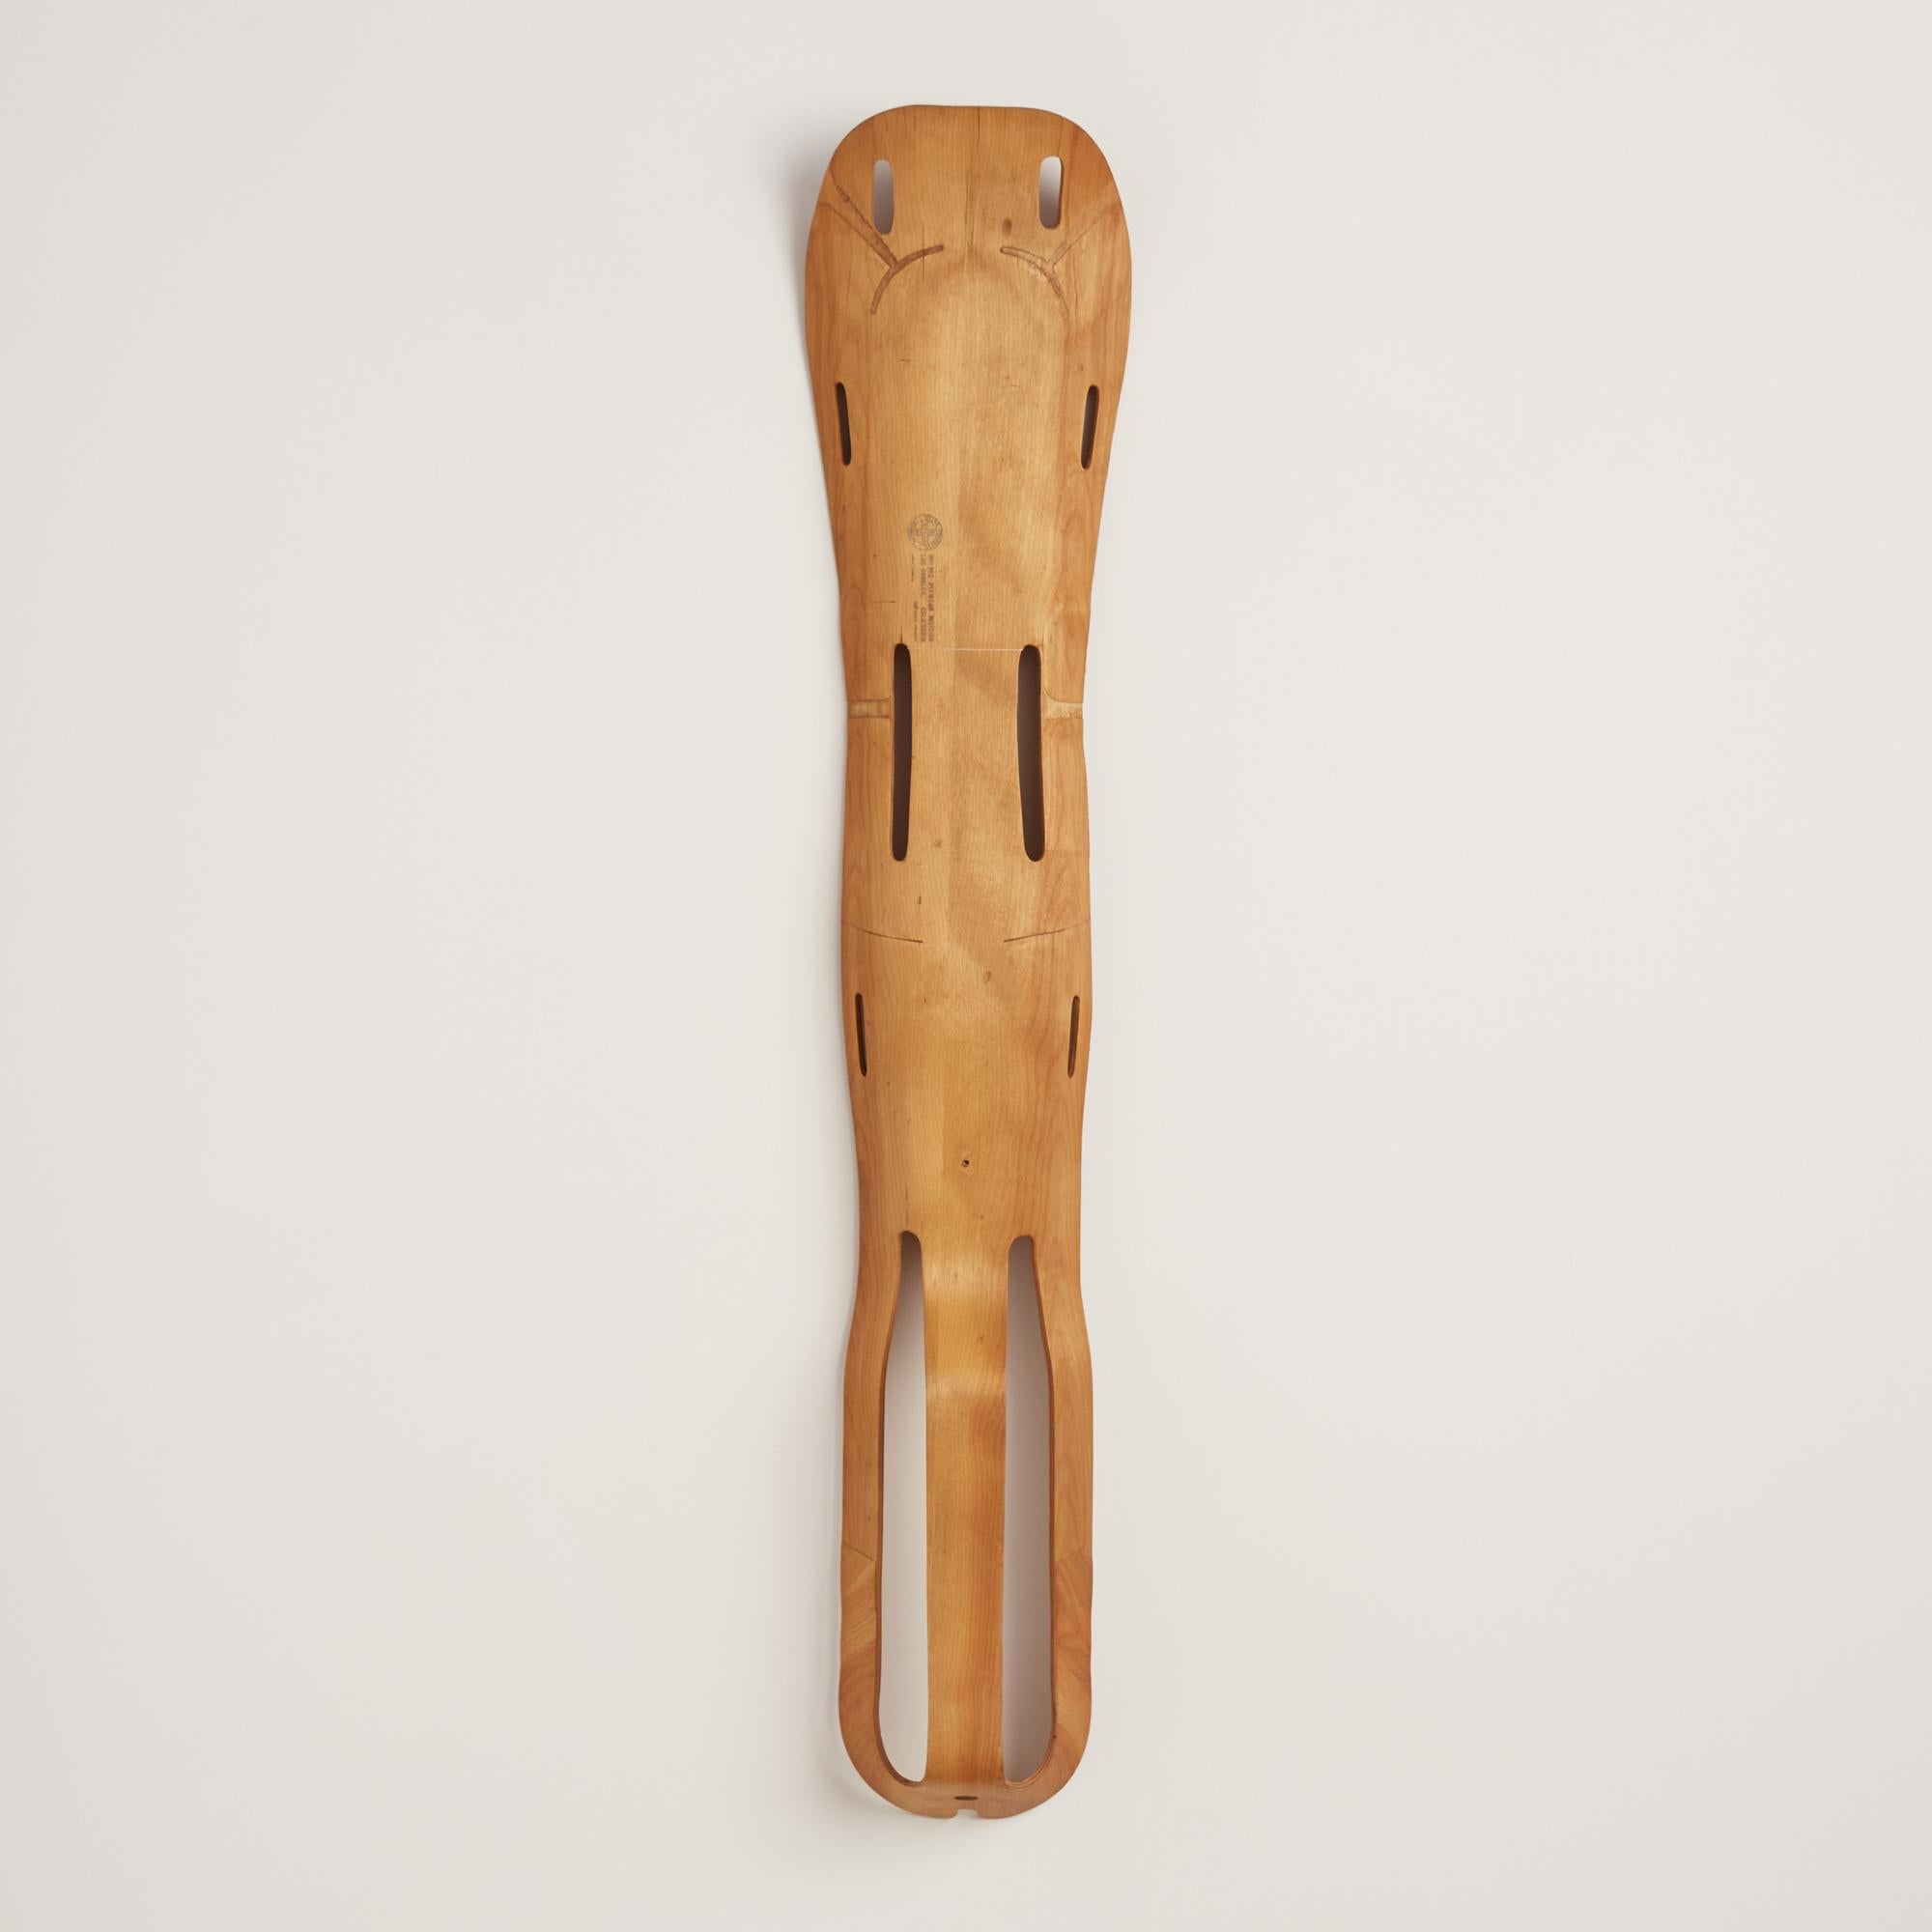 Modern Eames Molded Plywood Leg Splint for Evans Products